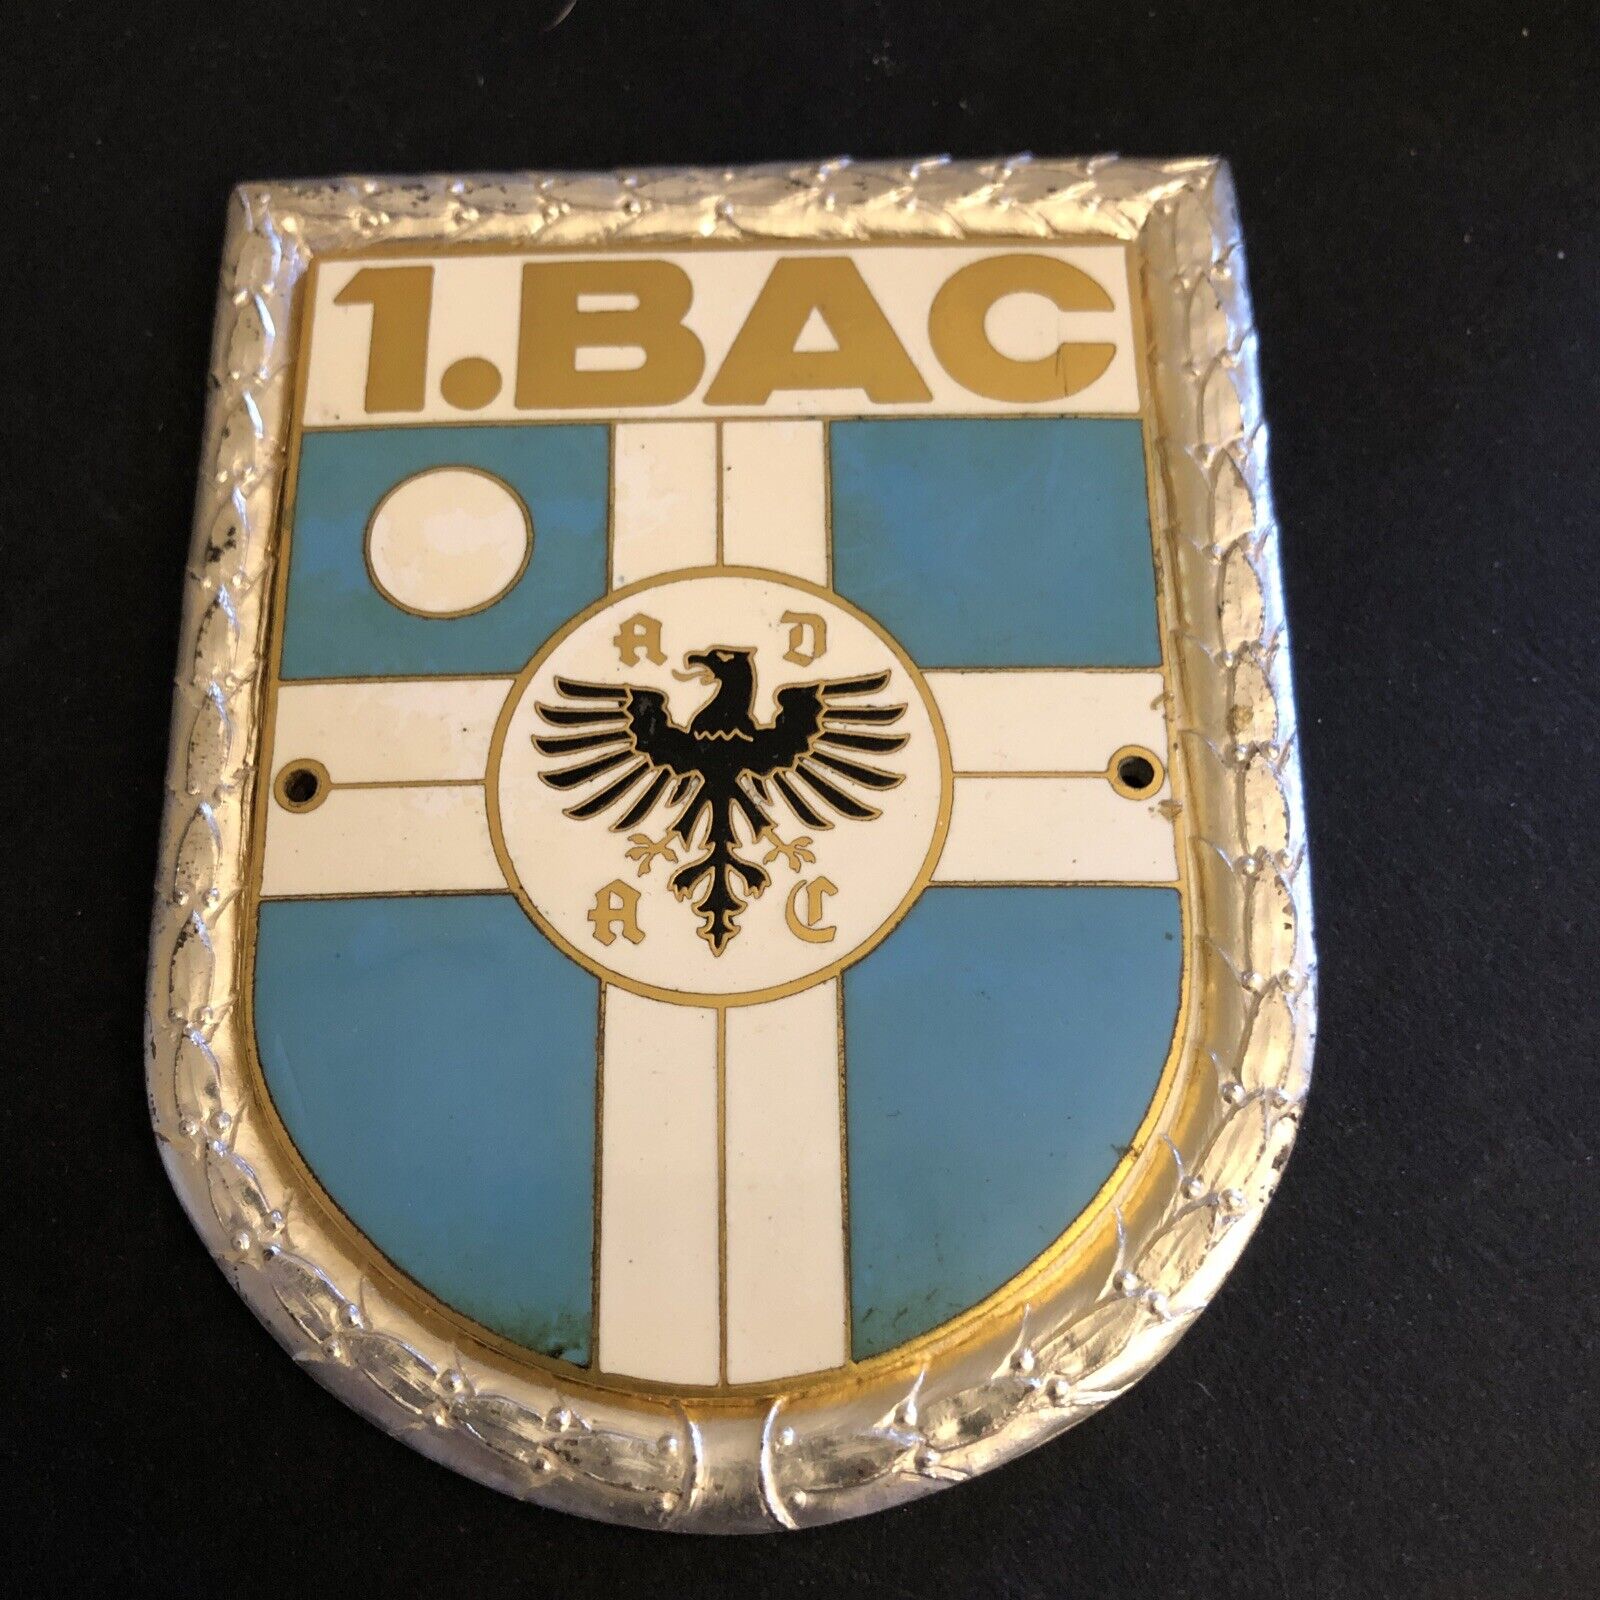 AWESOME Rare  1.BAC automobile grill badge